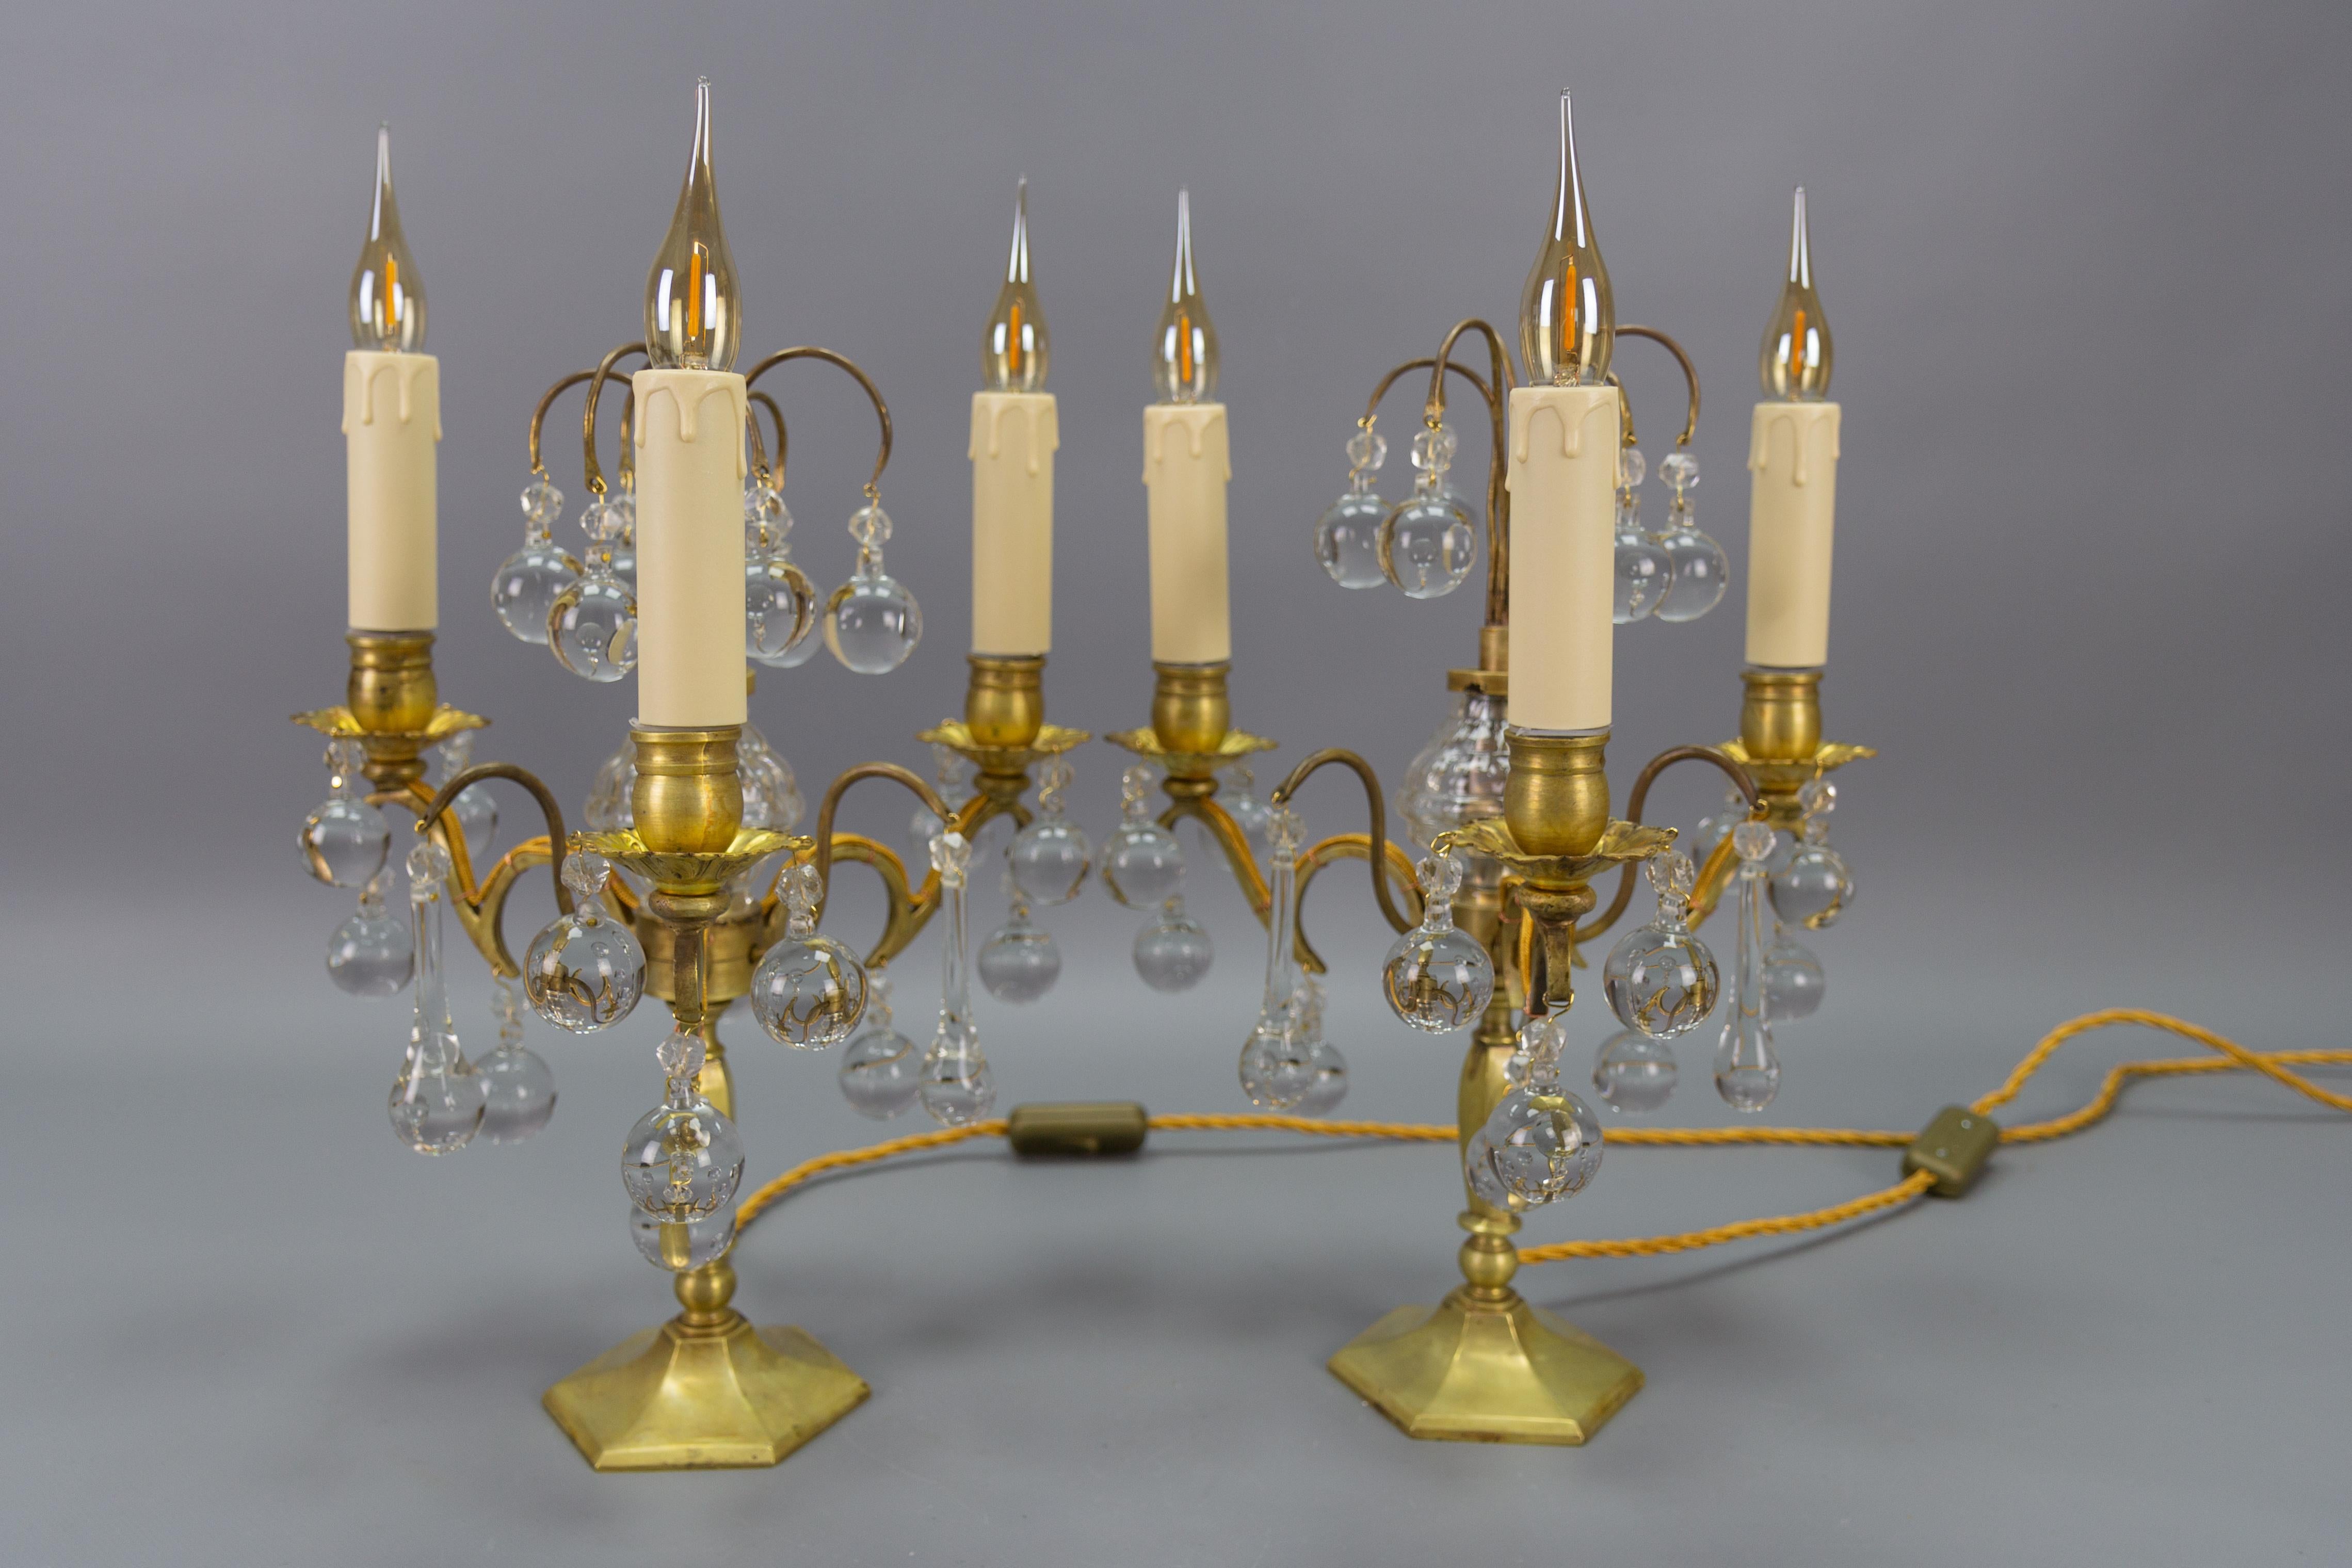 Pair of French brass and crystal three-light girandoles table lamps from circa 1900.
This elegant pair of French antique candelabra table lamps or girandoles are made of brass and are decorated with crystals - balls, teardrop-shaped crystals, and